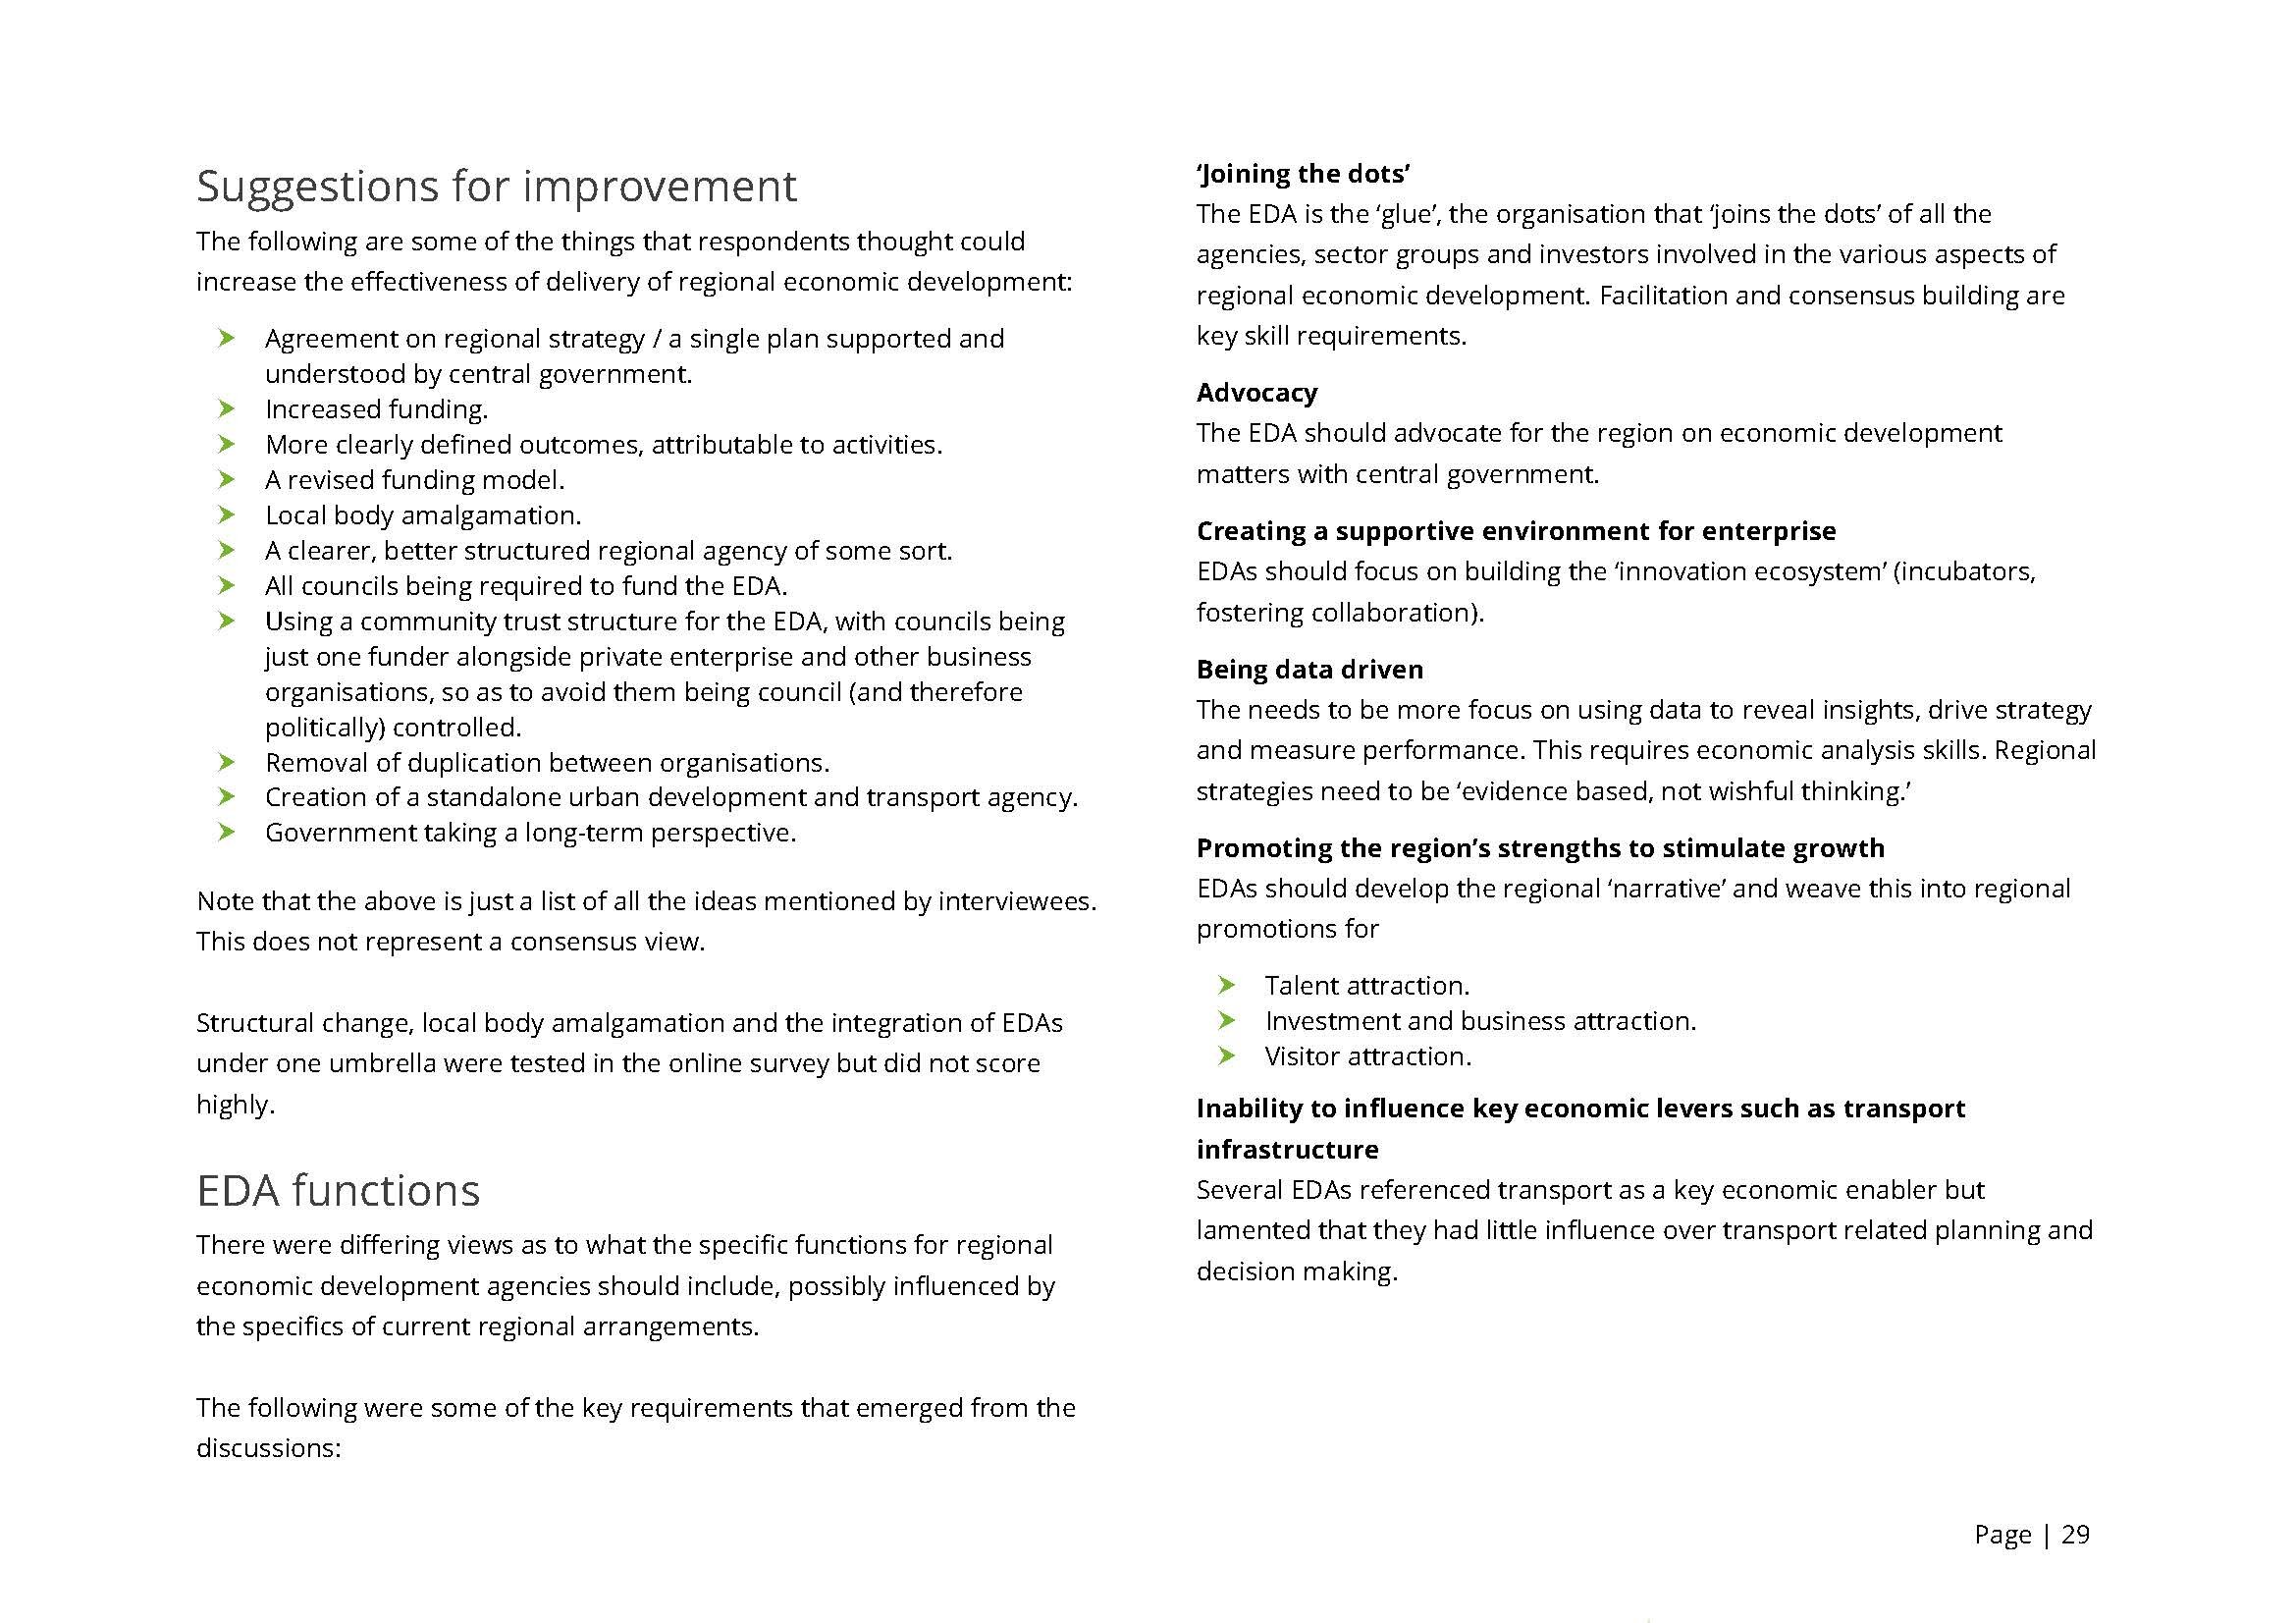 Future Challenges and Opportunities in Economic Development, HenleyHutchings TEST_Page_29.jpg